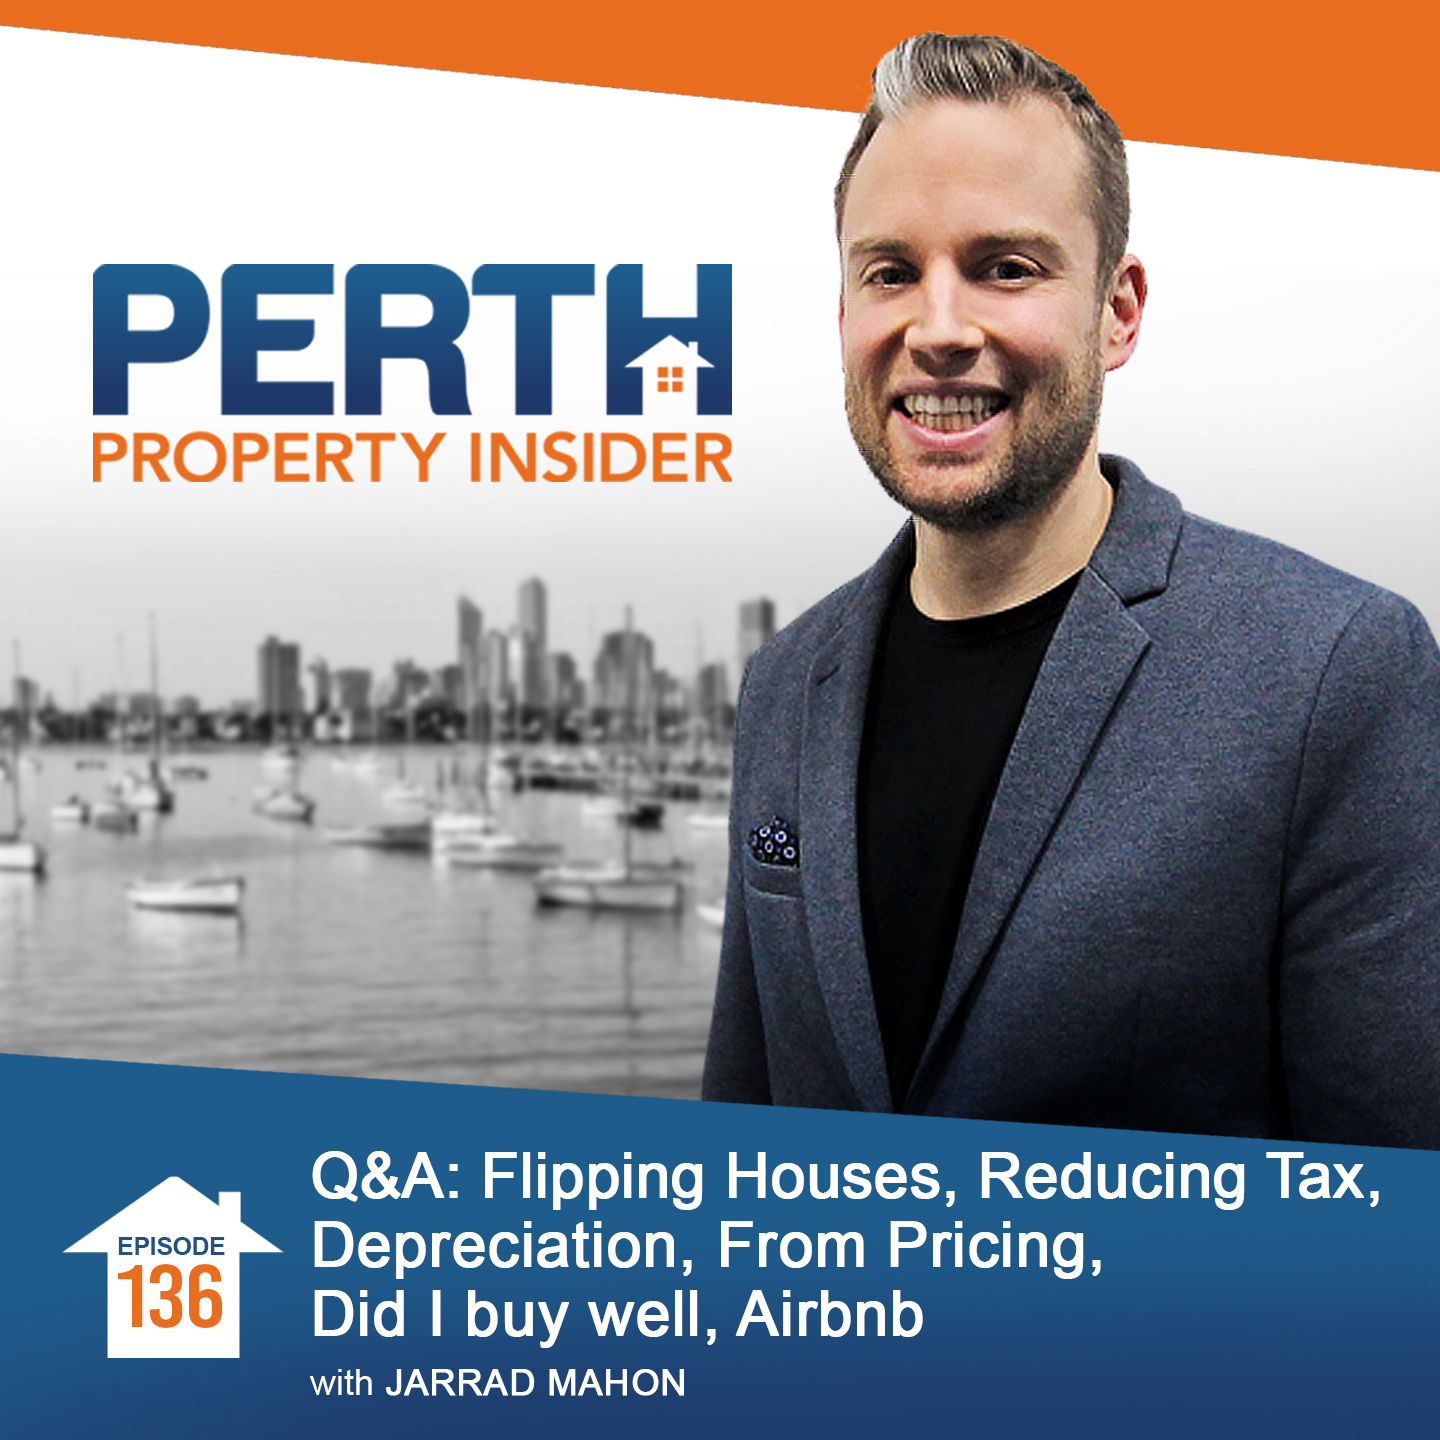 Q&A: Flipping Houses, Reducing Tax, Depreciation, From Pricing, Did I buy well, Airbnb